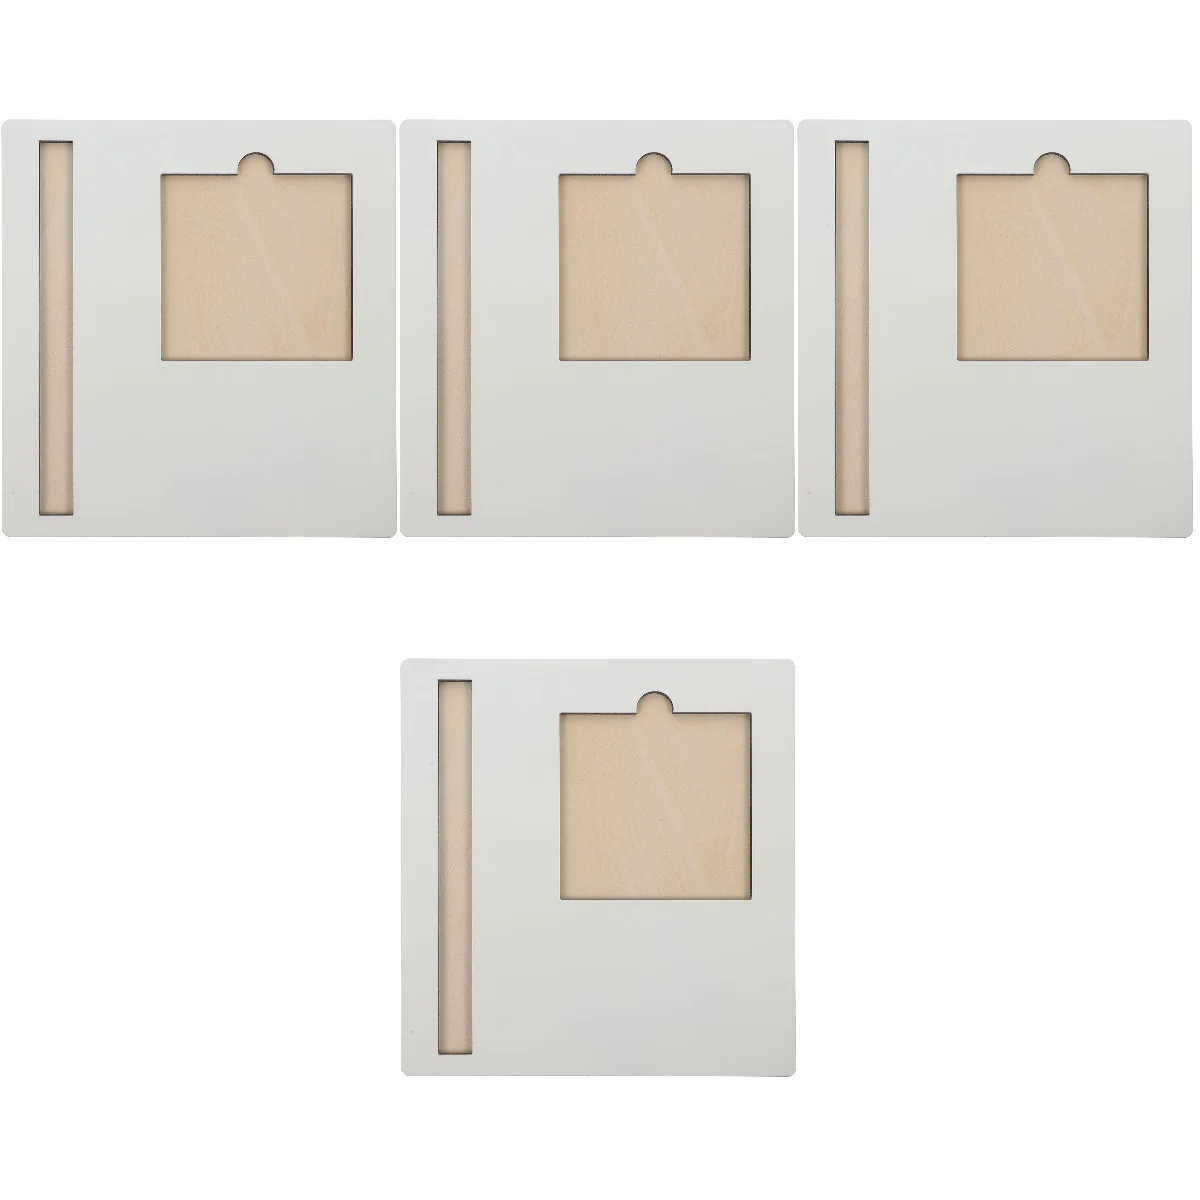 

4pcs Sublimation Blanks Product DIY Sticky Memo Holder Office Memo Notes Pad Tray